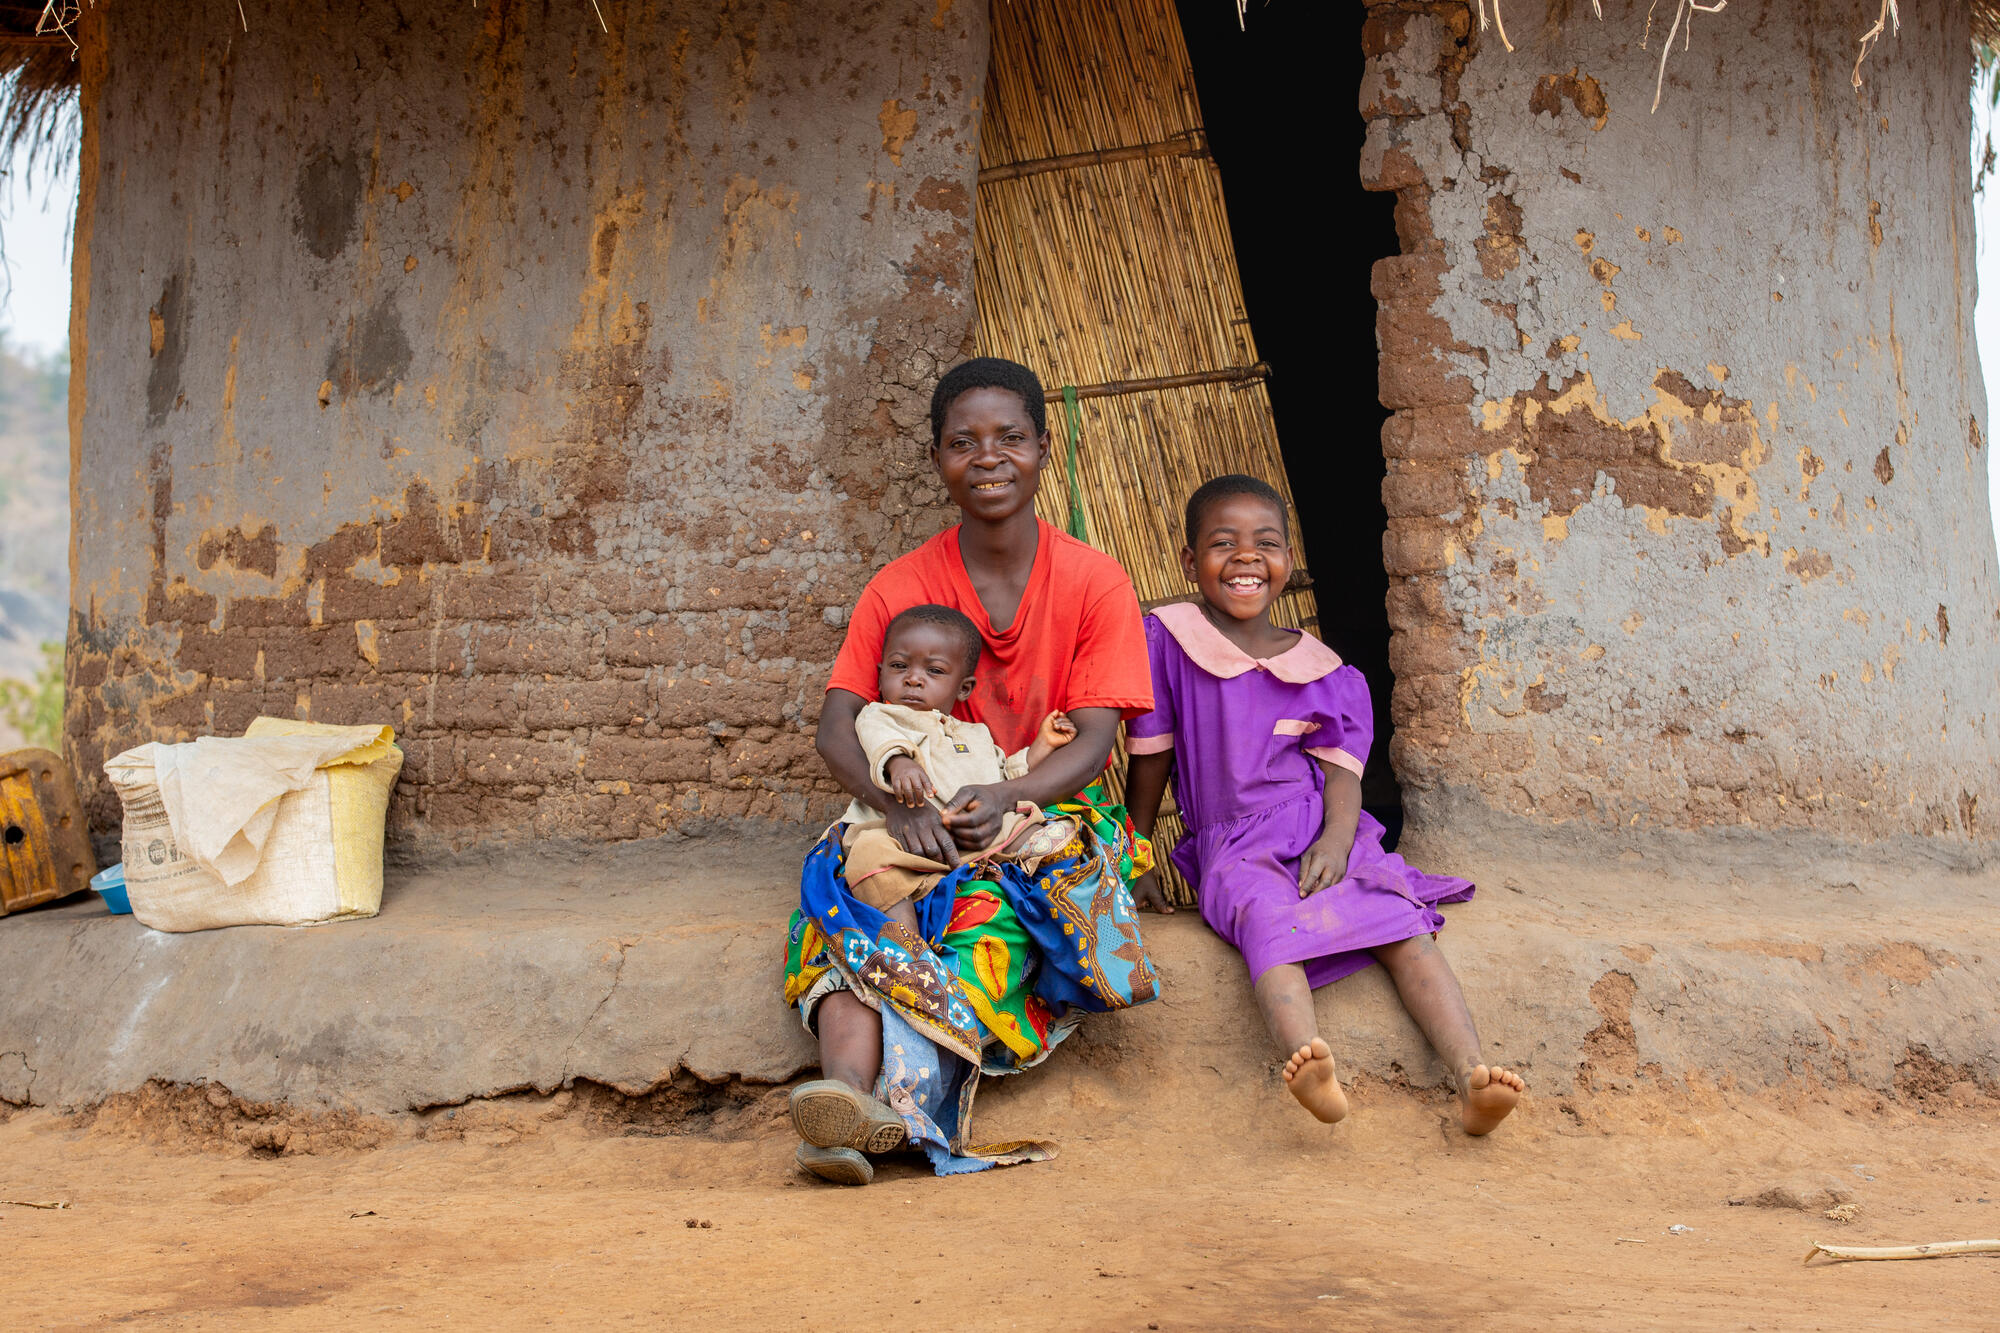 Ireen’s family has clean water in their community for the first time